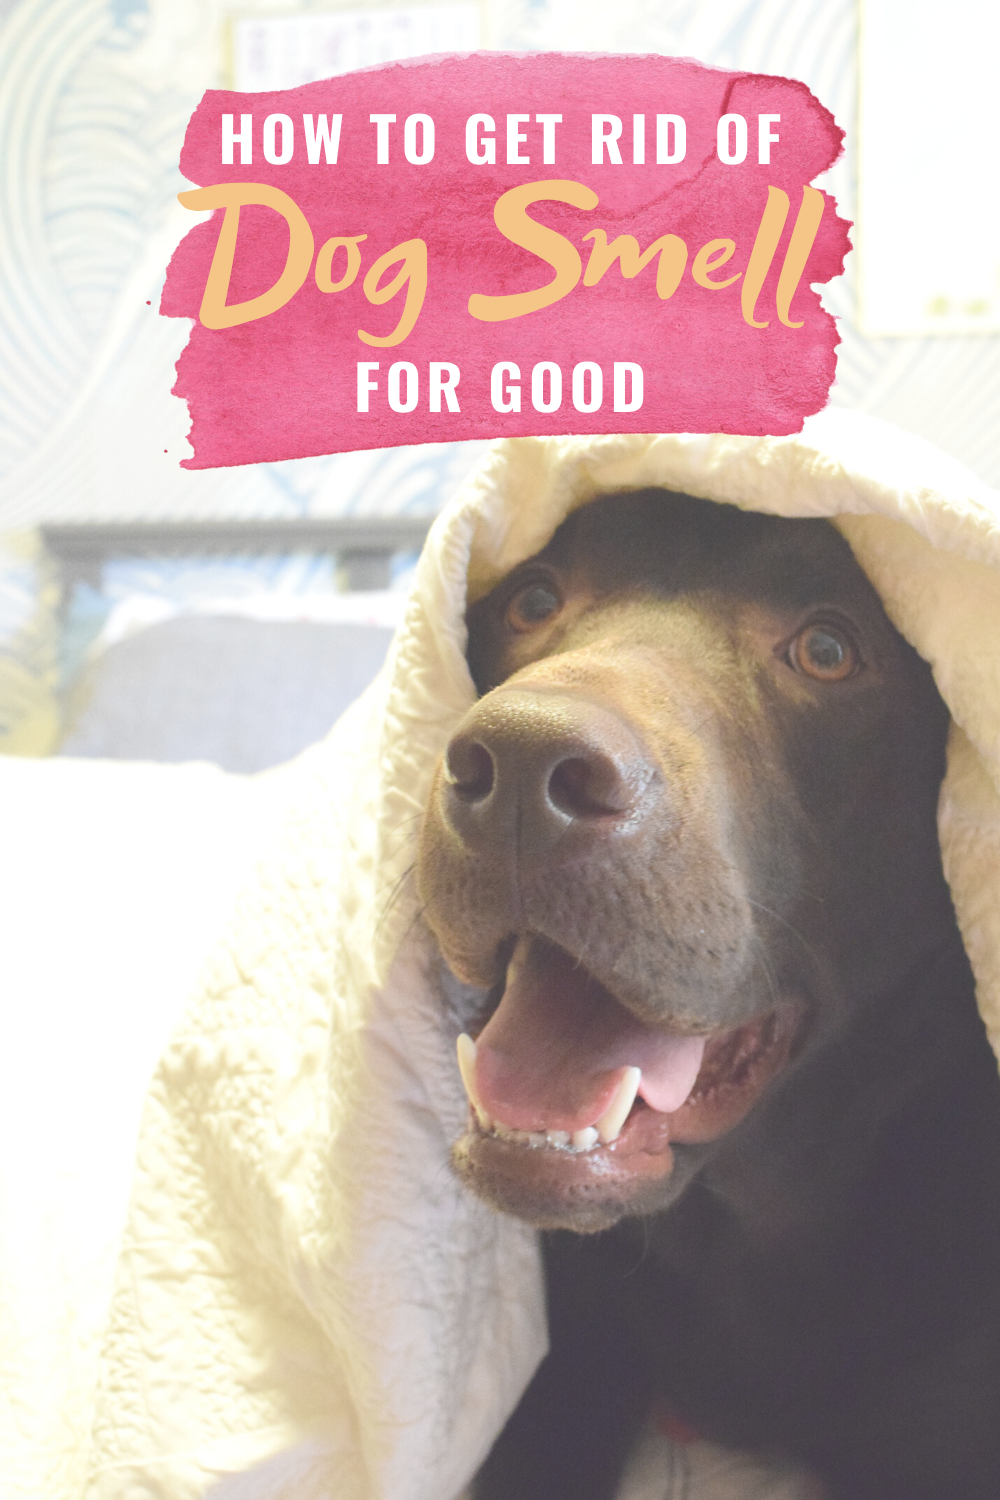 How To Get Rid of Dog Smell - Looking to get rid of the odor that comes along with owning dogs? Today I'm sharing how to get rid of dog smell in your house! | Dog Stink - Dog Smell In House - Get Rid Of Dog Smell - Dog Stink in House - How to get pee smell out of carpet